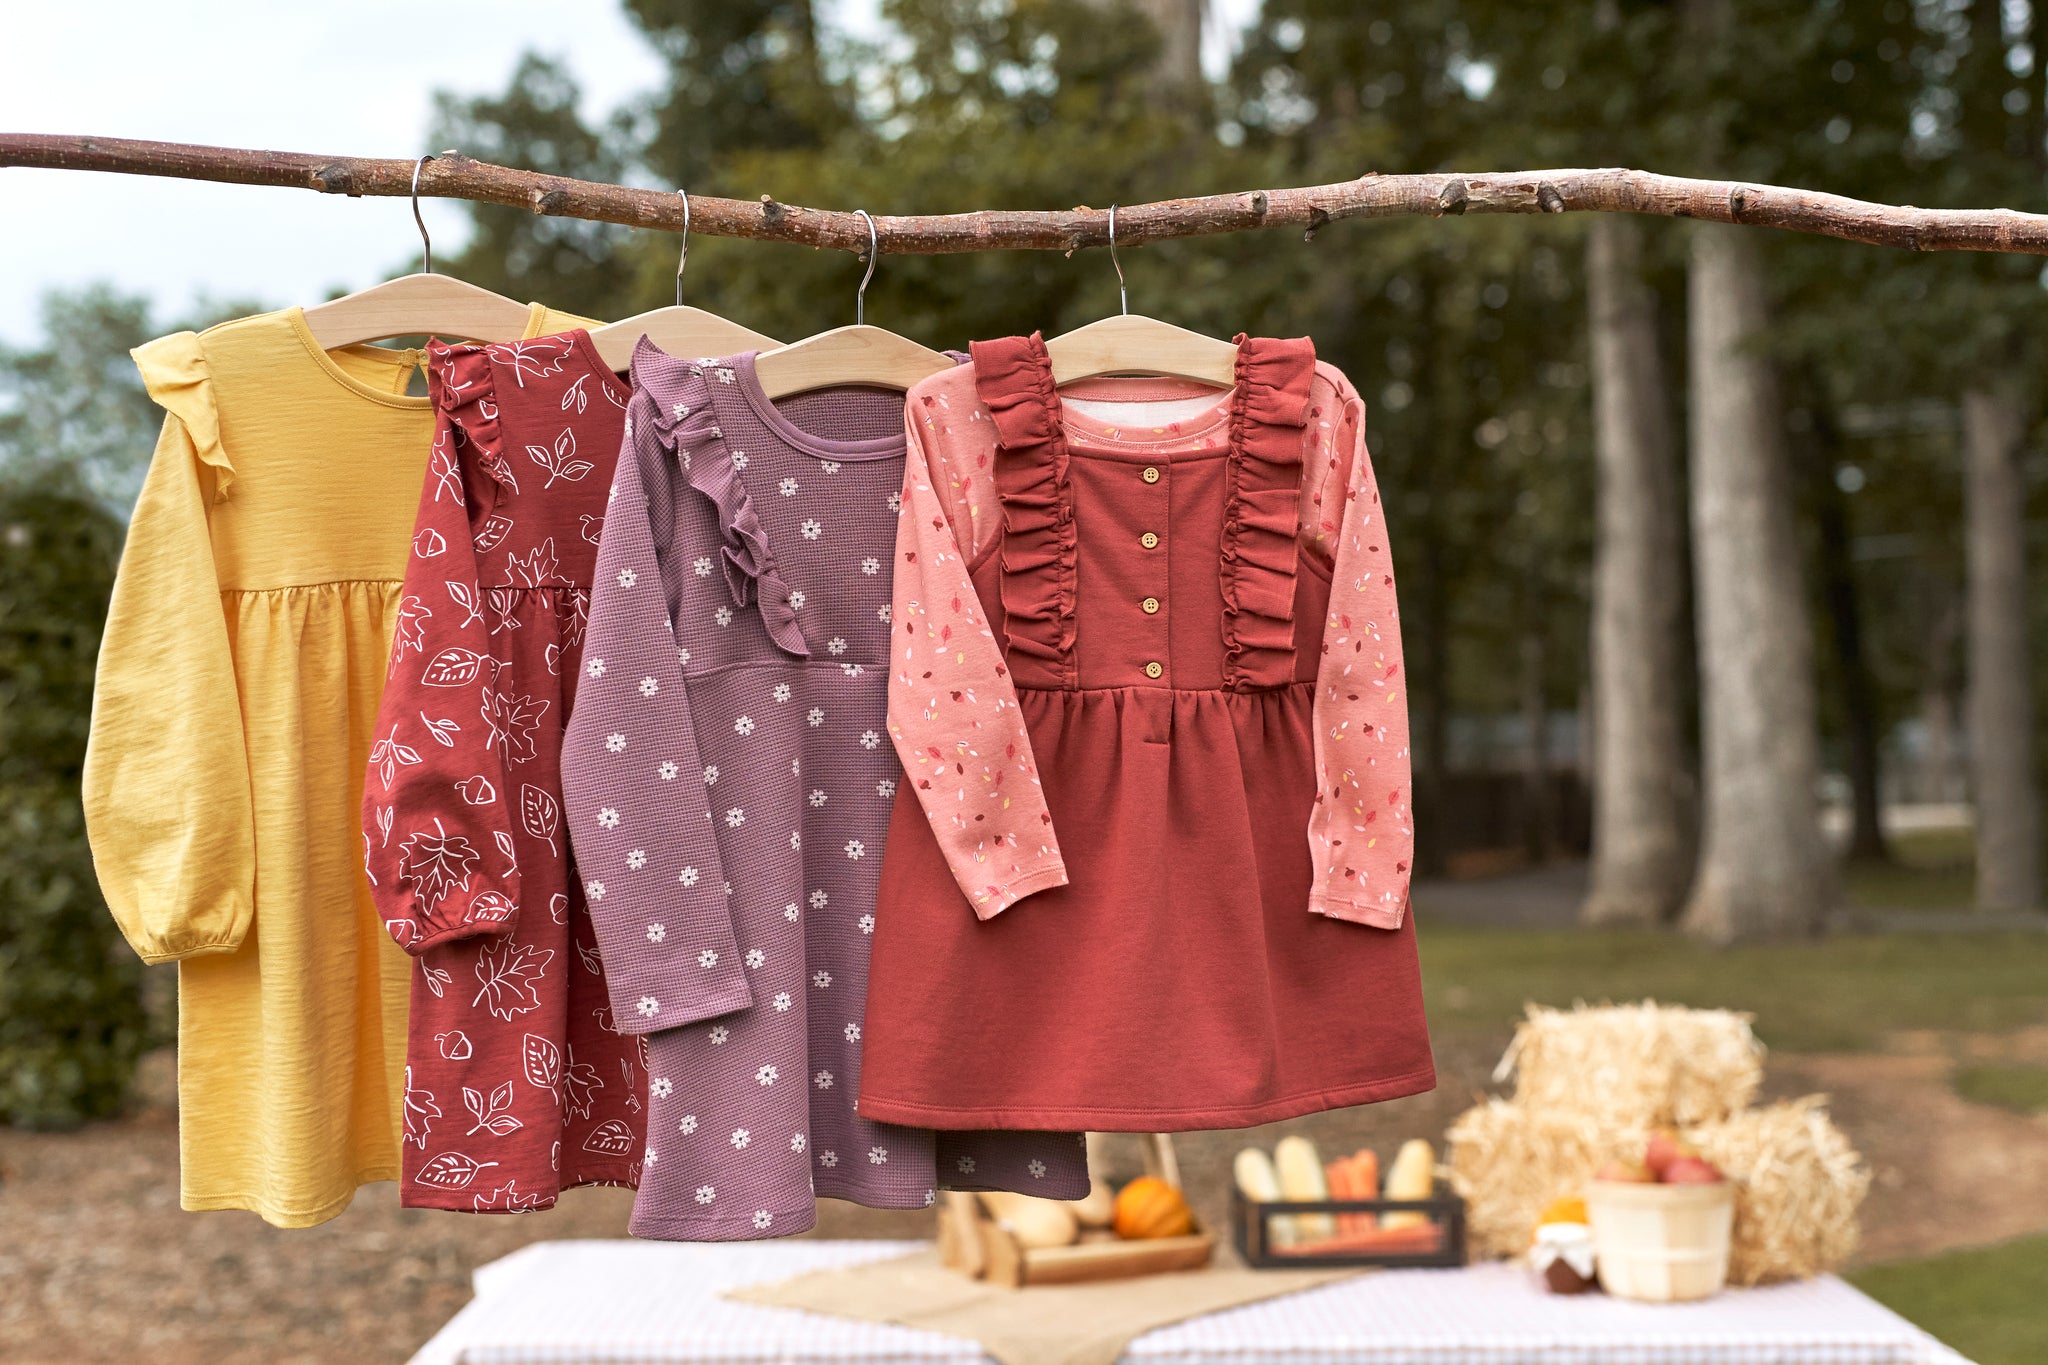 Fall toddler and baby dresses hanging in the woods with hay bales behind them.